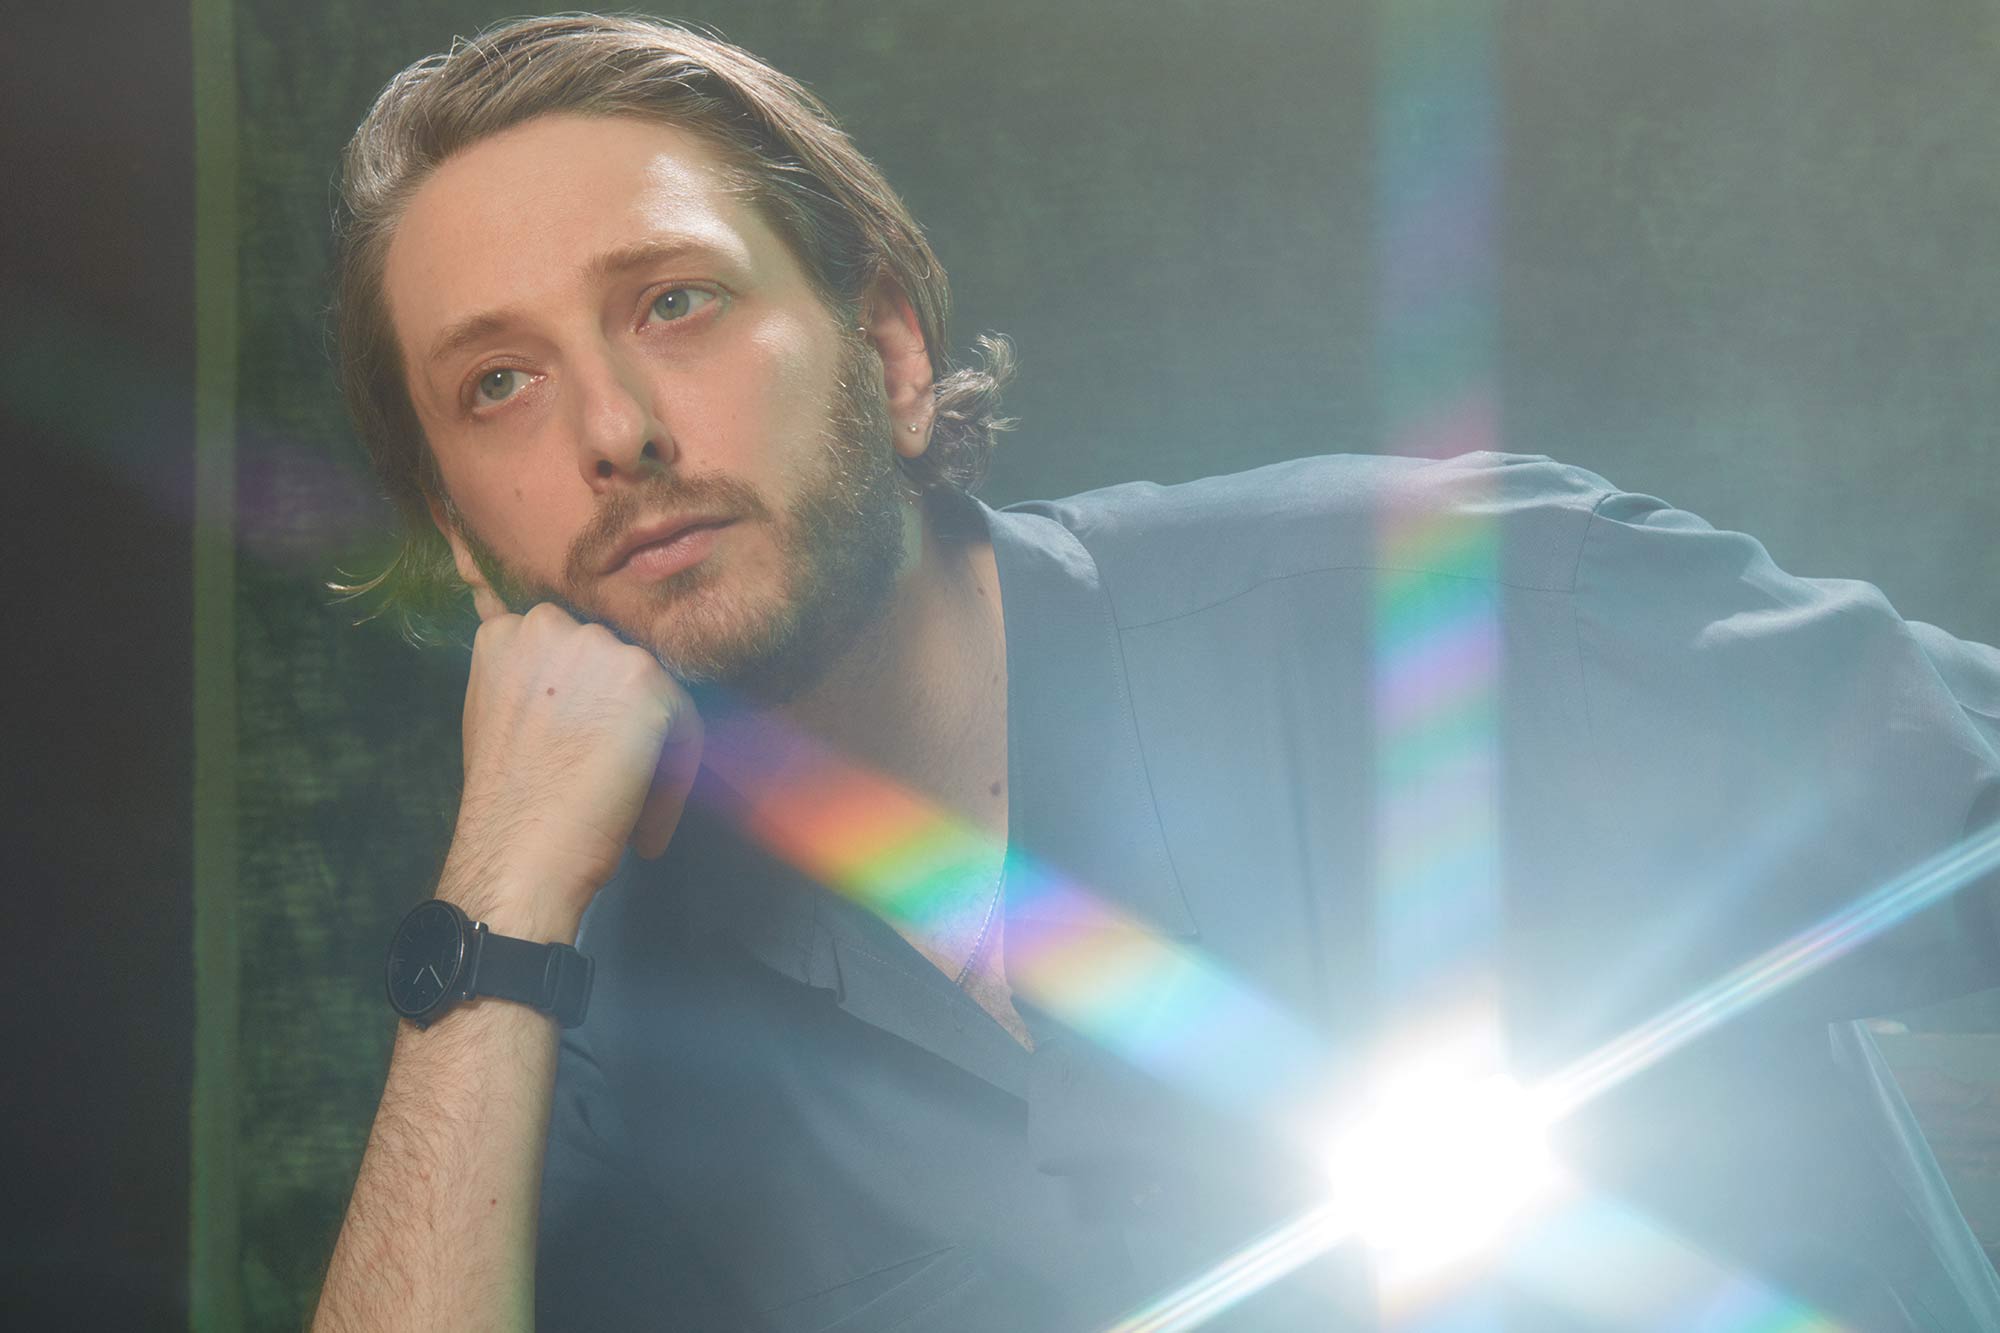 10 questions with Oneohtrix Point Never - TOKION